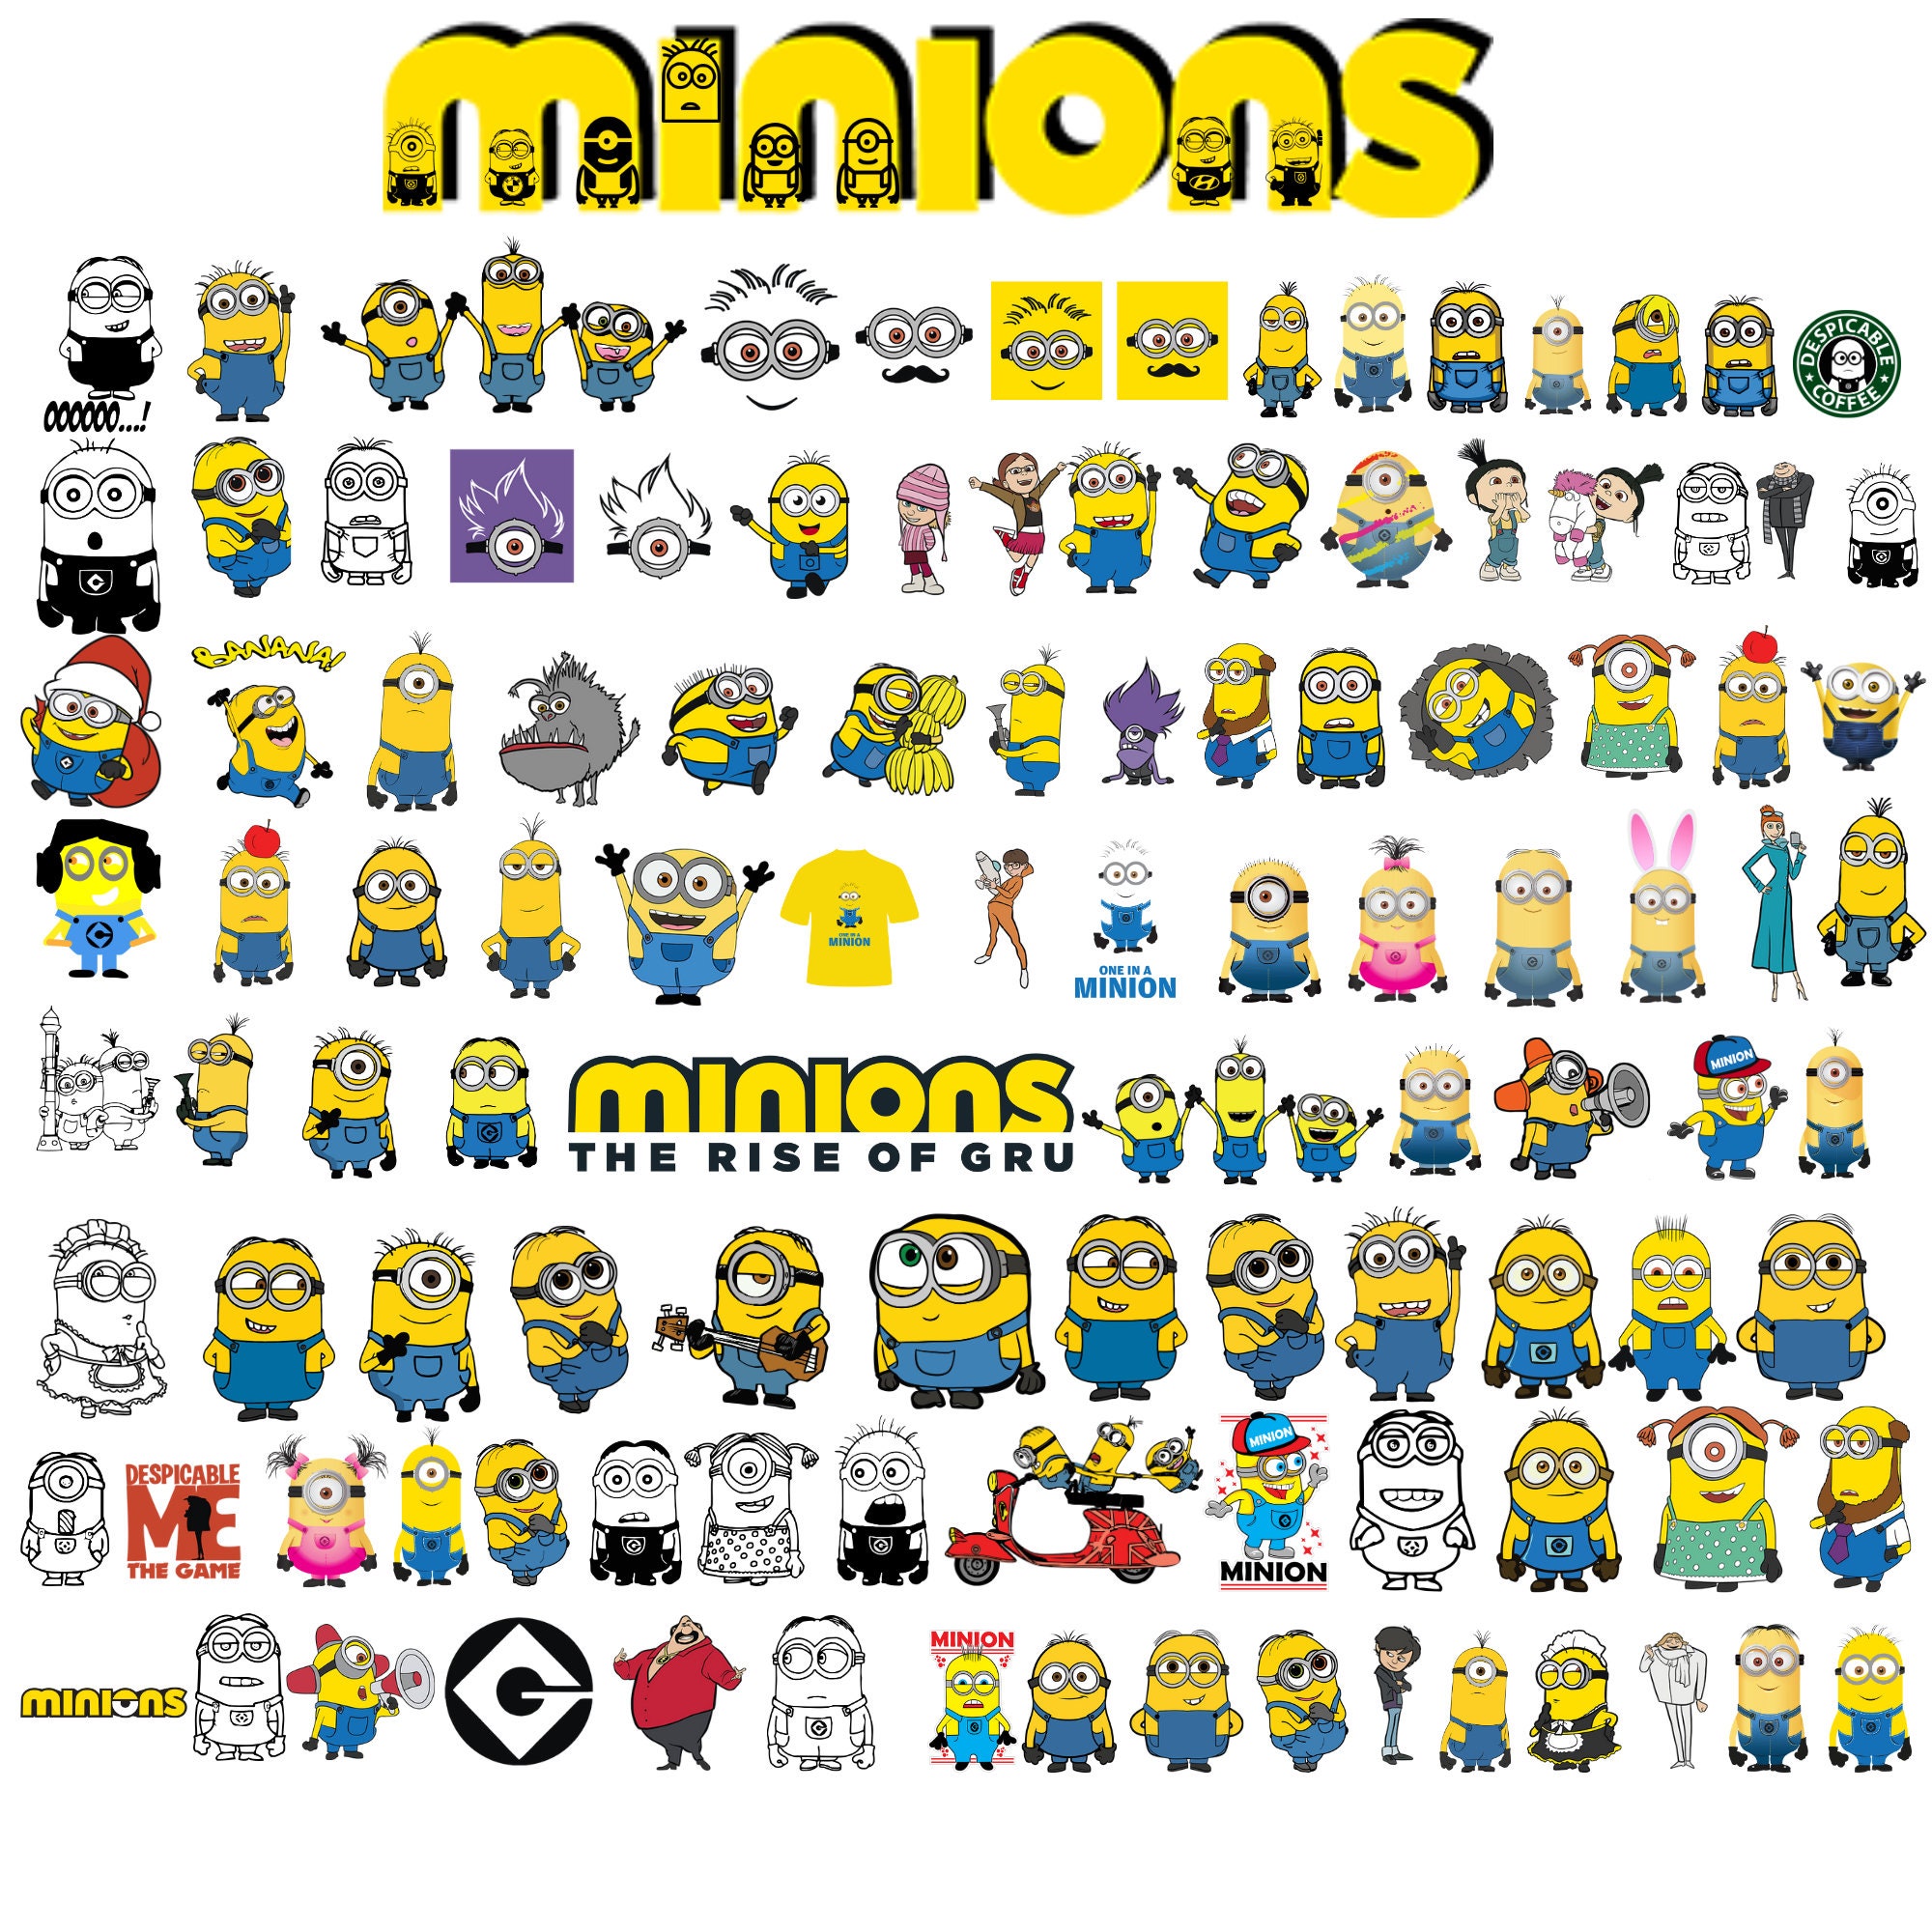 Despicable Me Minions Stickers and Tattoos Party Favors Bundle ~ 75 Minions  Temporary Tattoos and 100 Minions Stickers for Kids (Minions Party Favors)